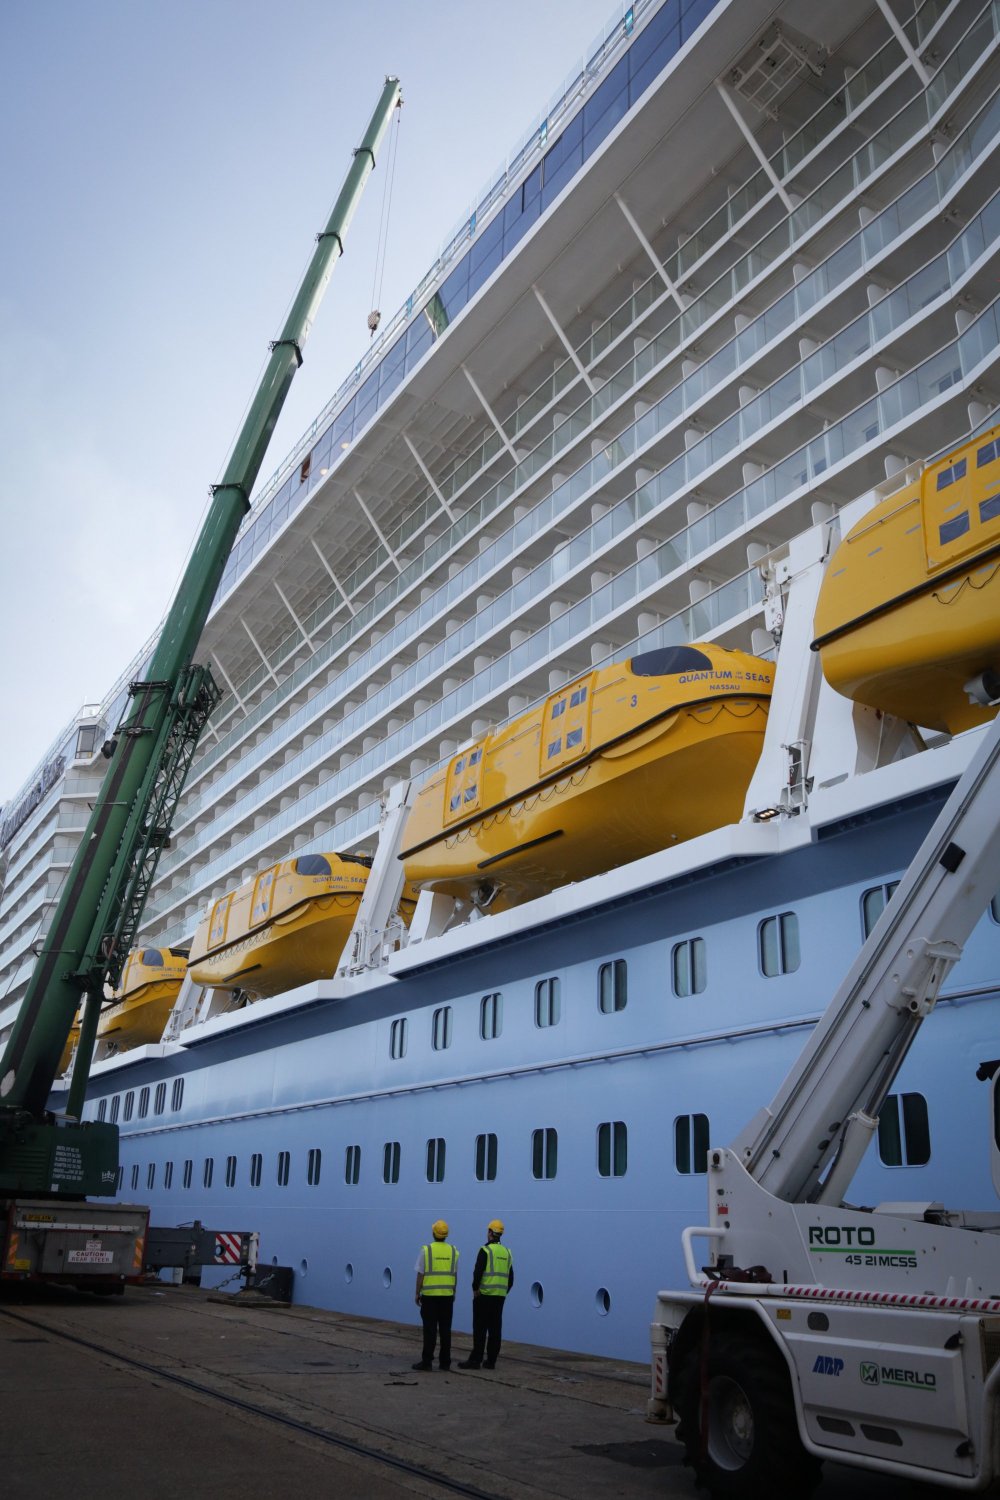 Quantum of the Seas - the smartest ship in the world